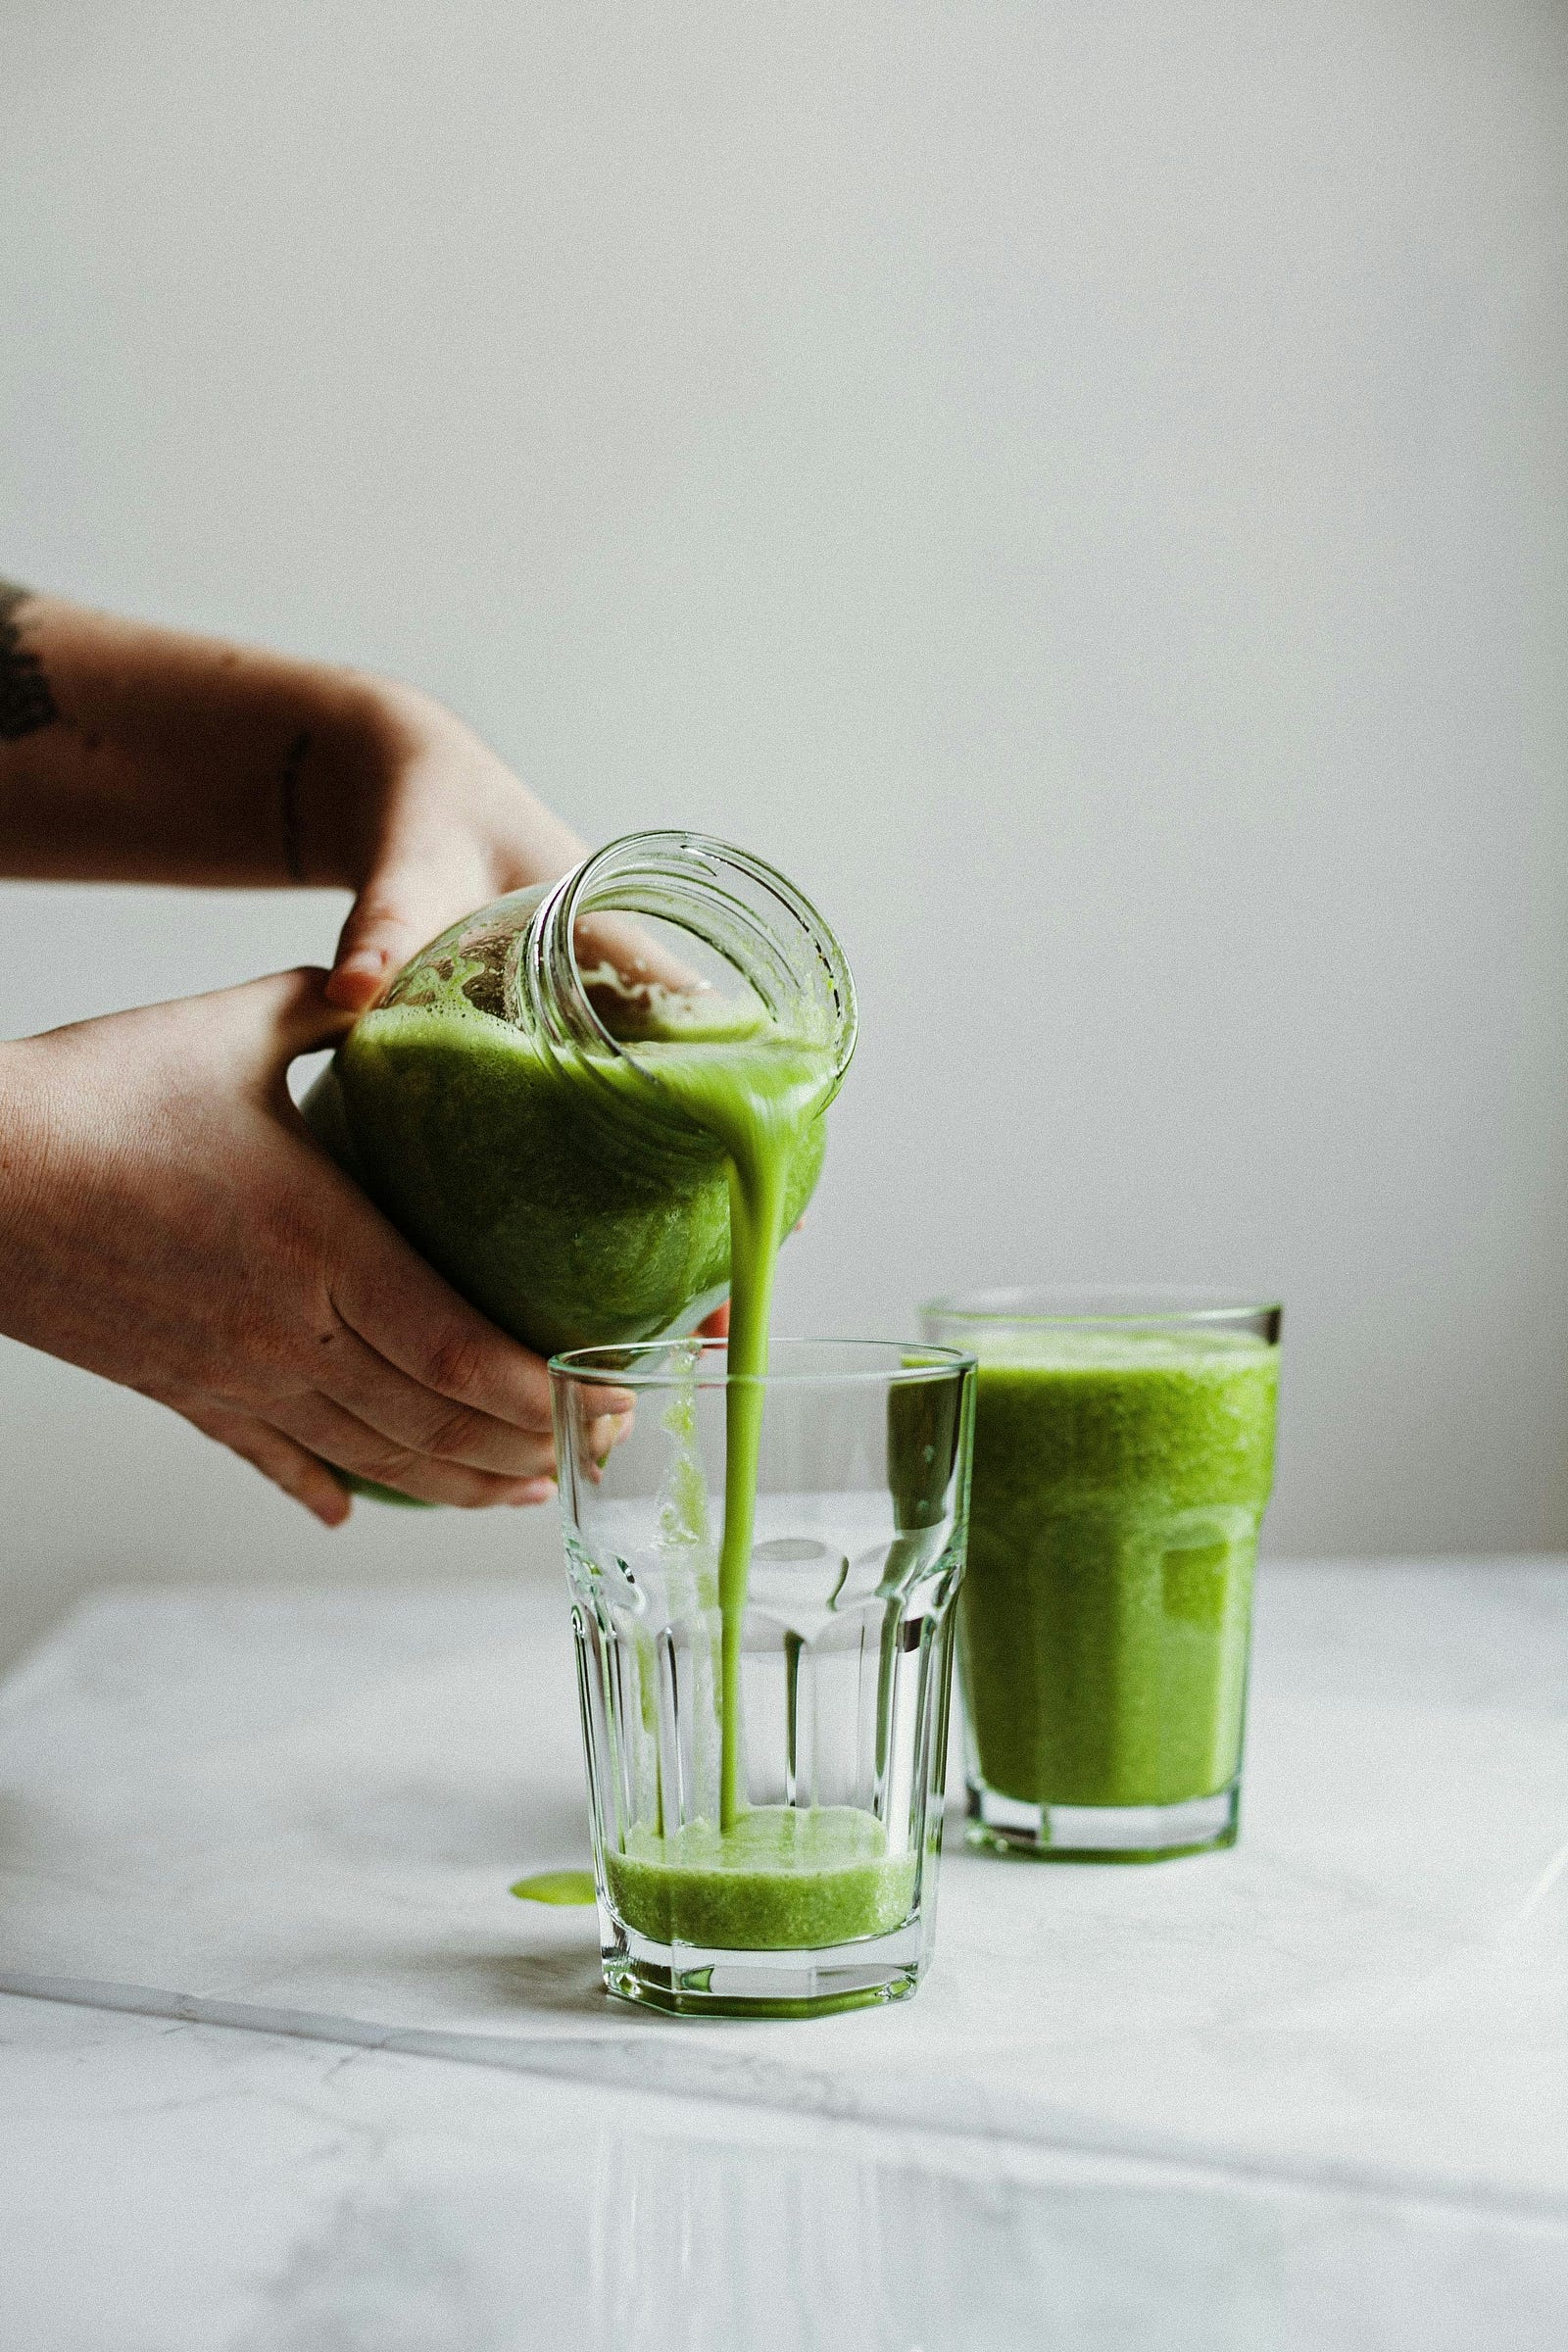 Someone pours green juice from a Mason jar into a glass.